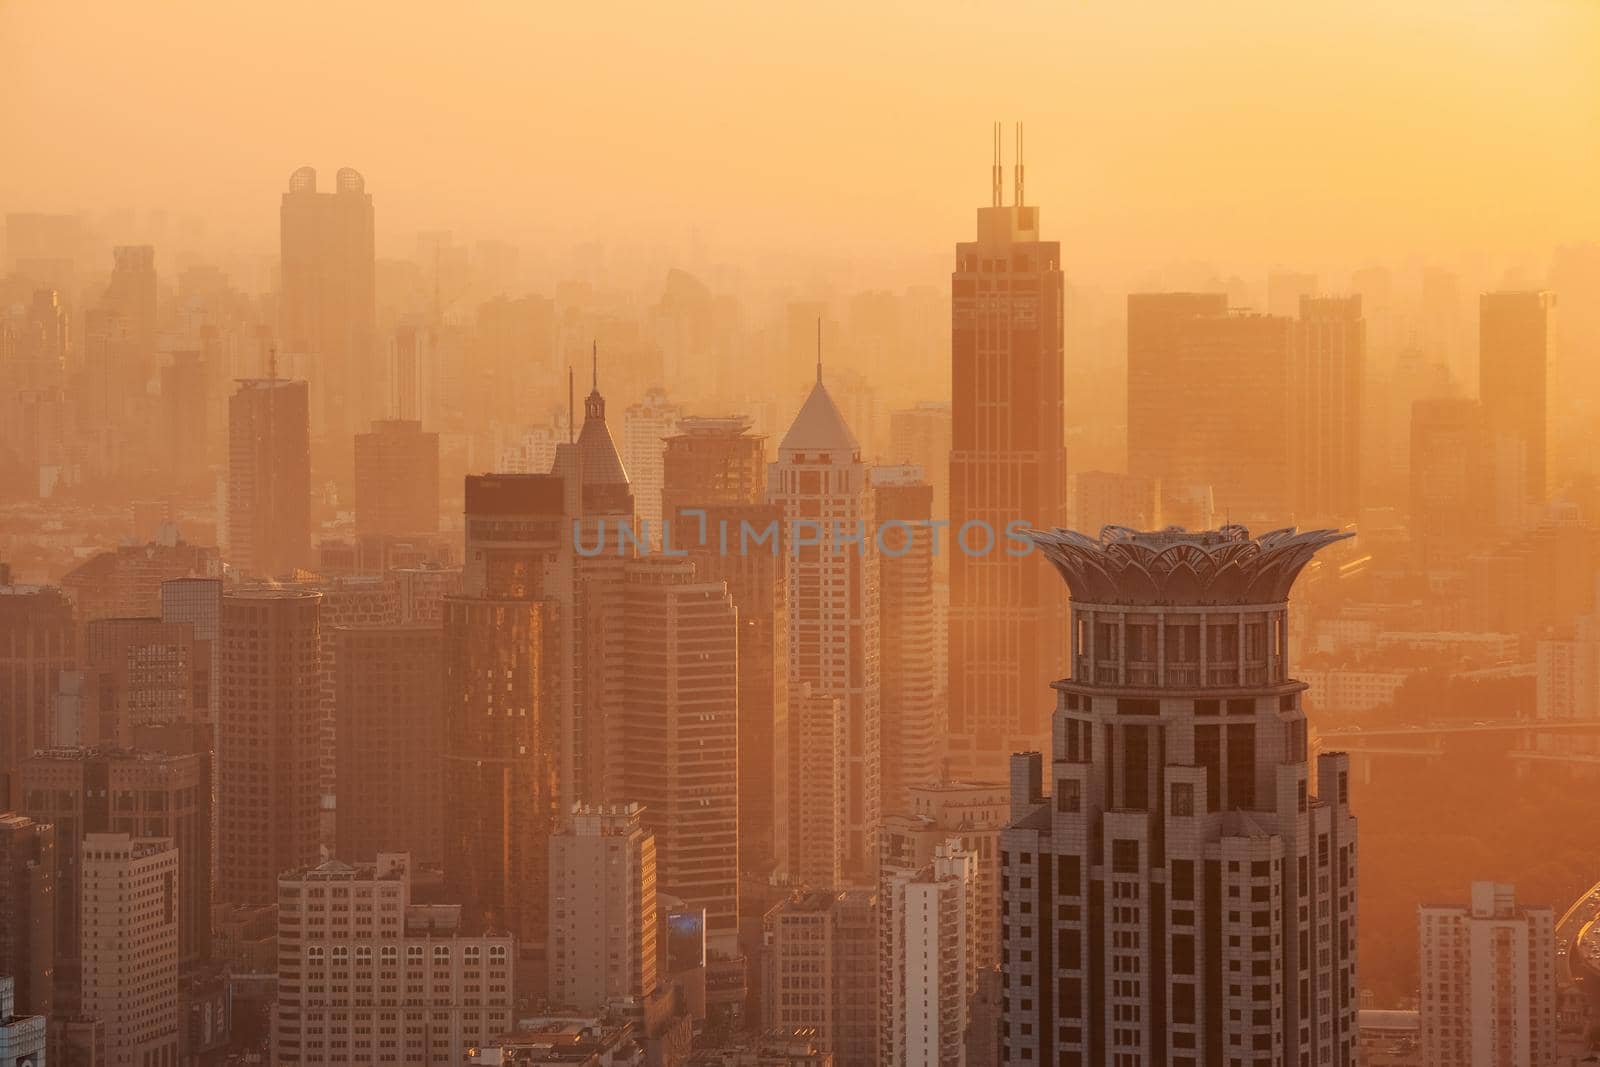 Sunset light over the skyline of urban architectural landscape in the Bund, Shanghai, China